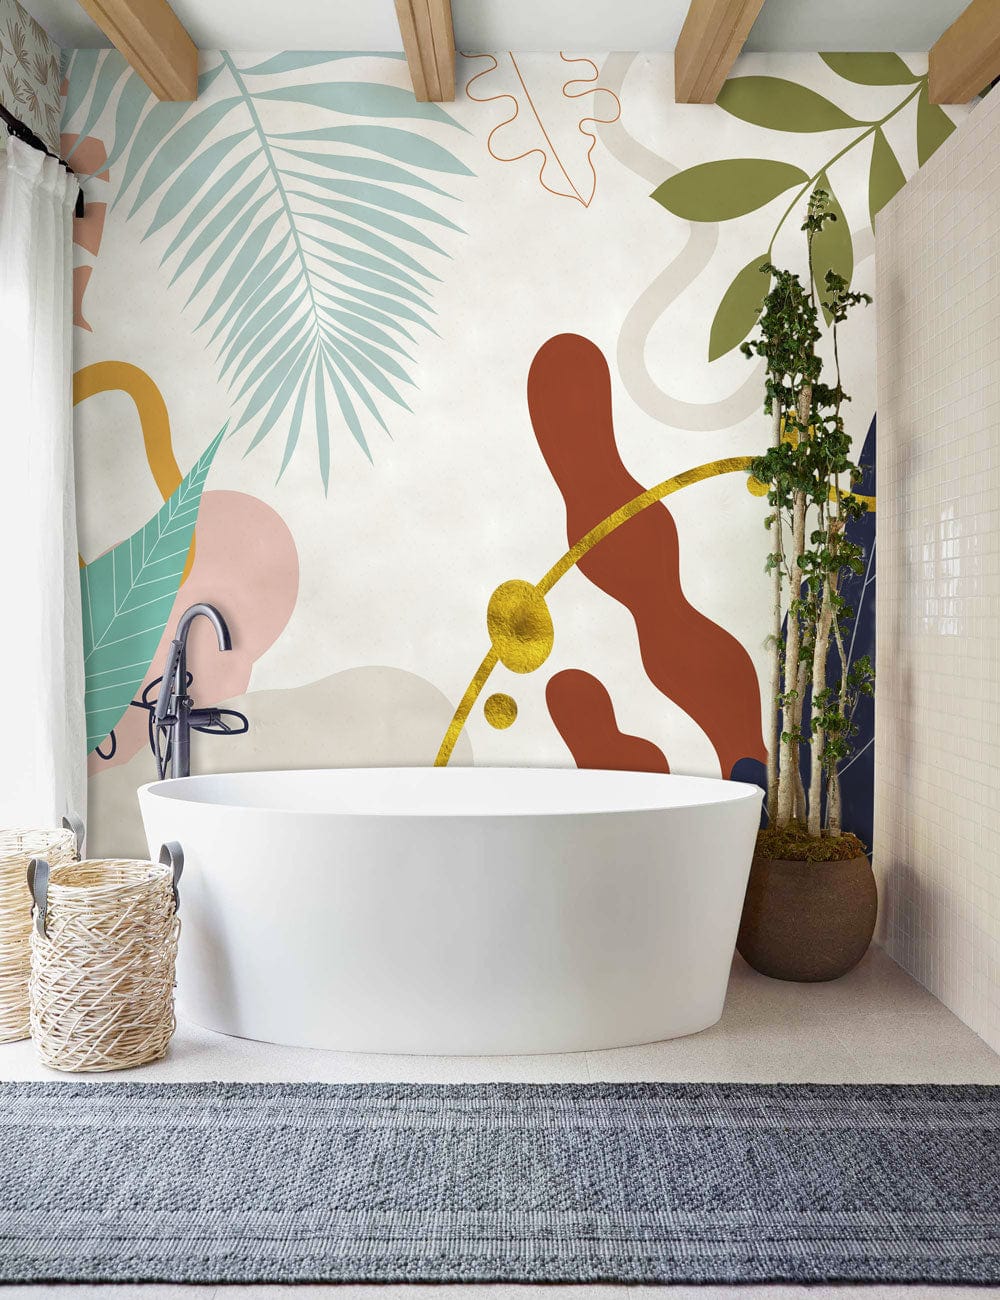 It is recommended to apply this wallpaper mural, which has an abstract design of colourful leaves, in the bathroom.